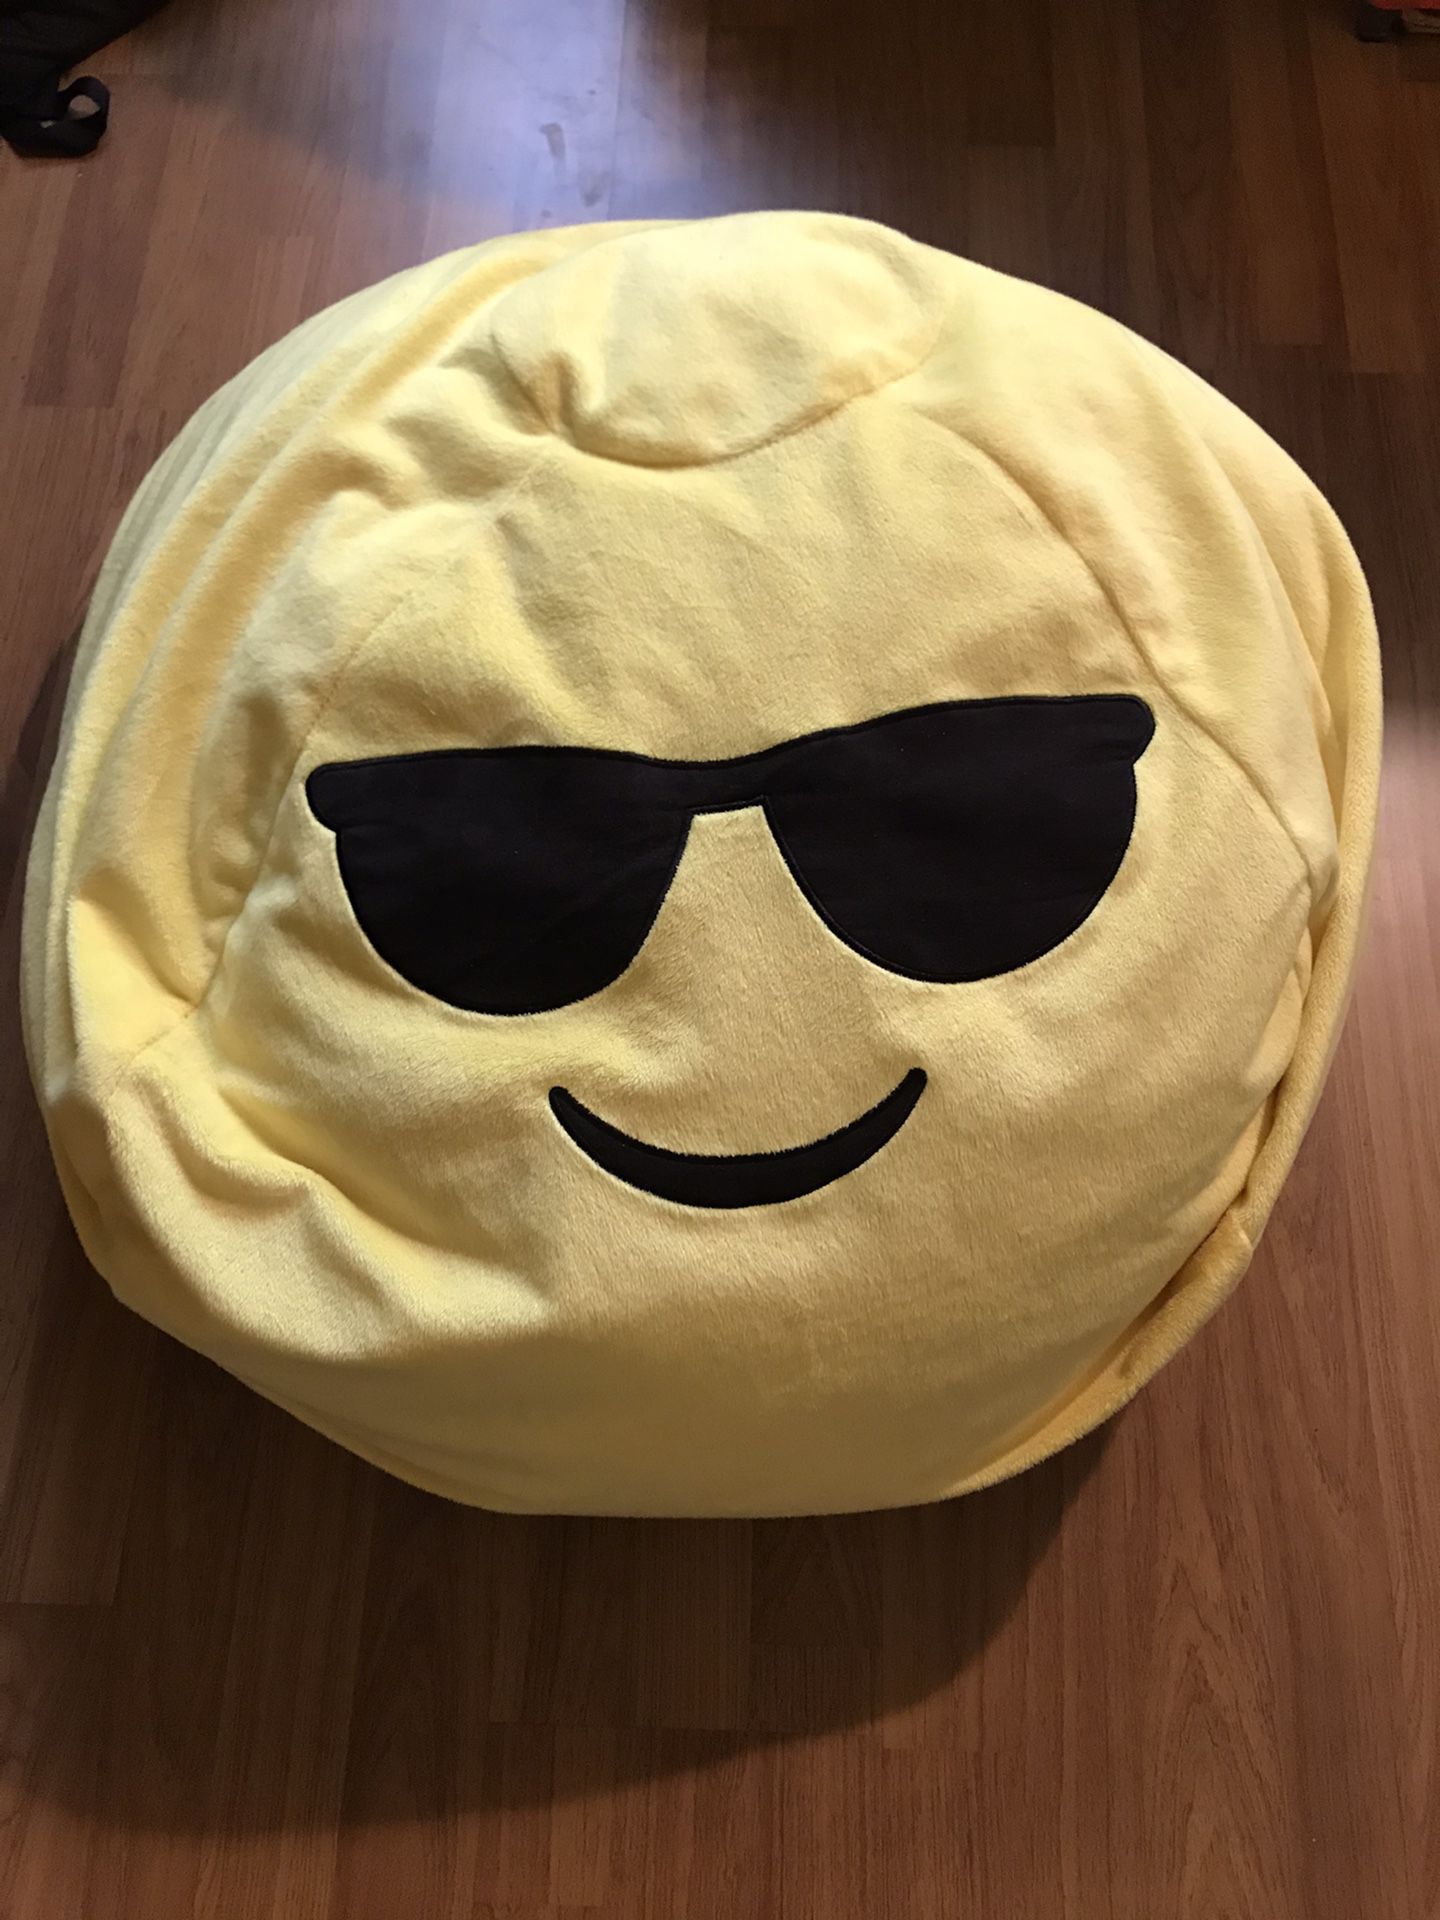 Bean Bag Chair By GoMoji In Excellent Condition $10